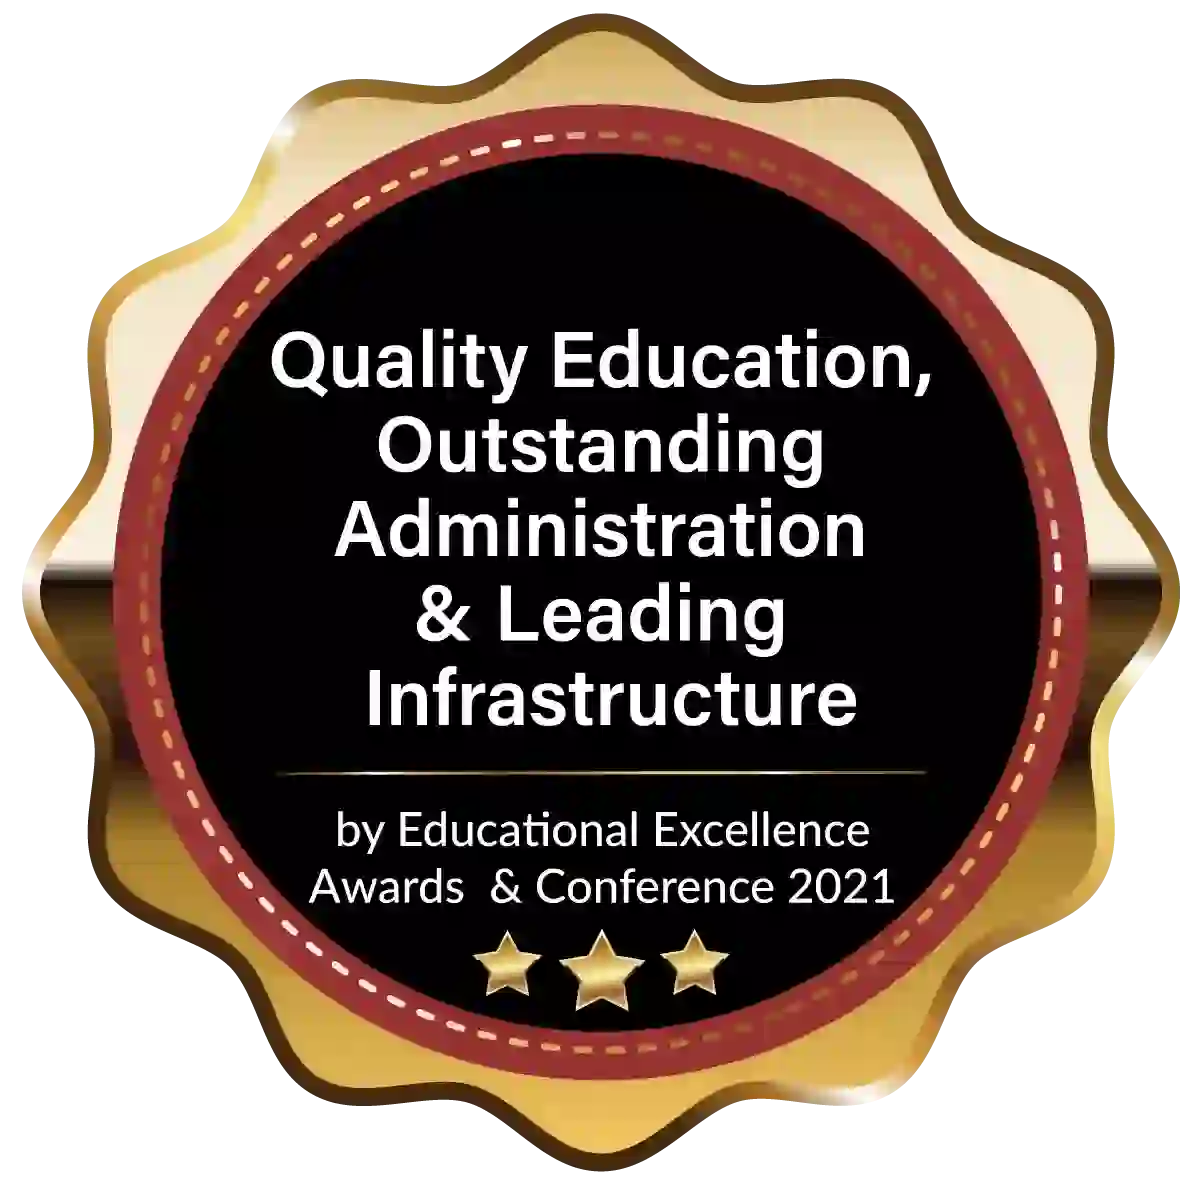 Quality Education, Outstanding Administration & Leading Infrastructure
by Educational Excellence Awards & Conference 2021